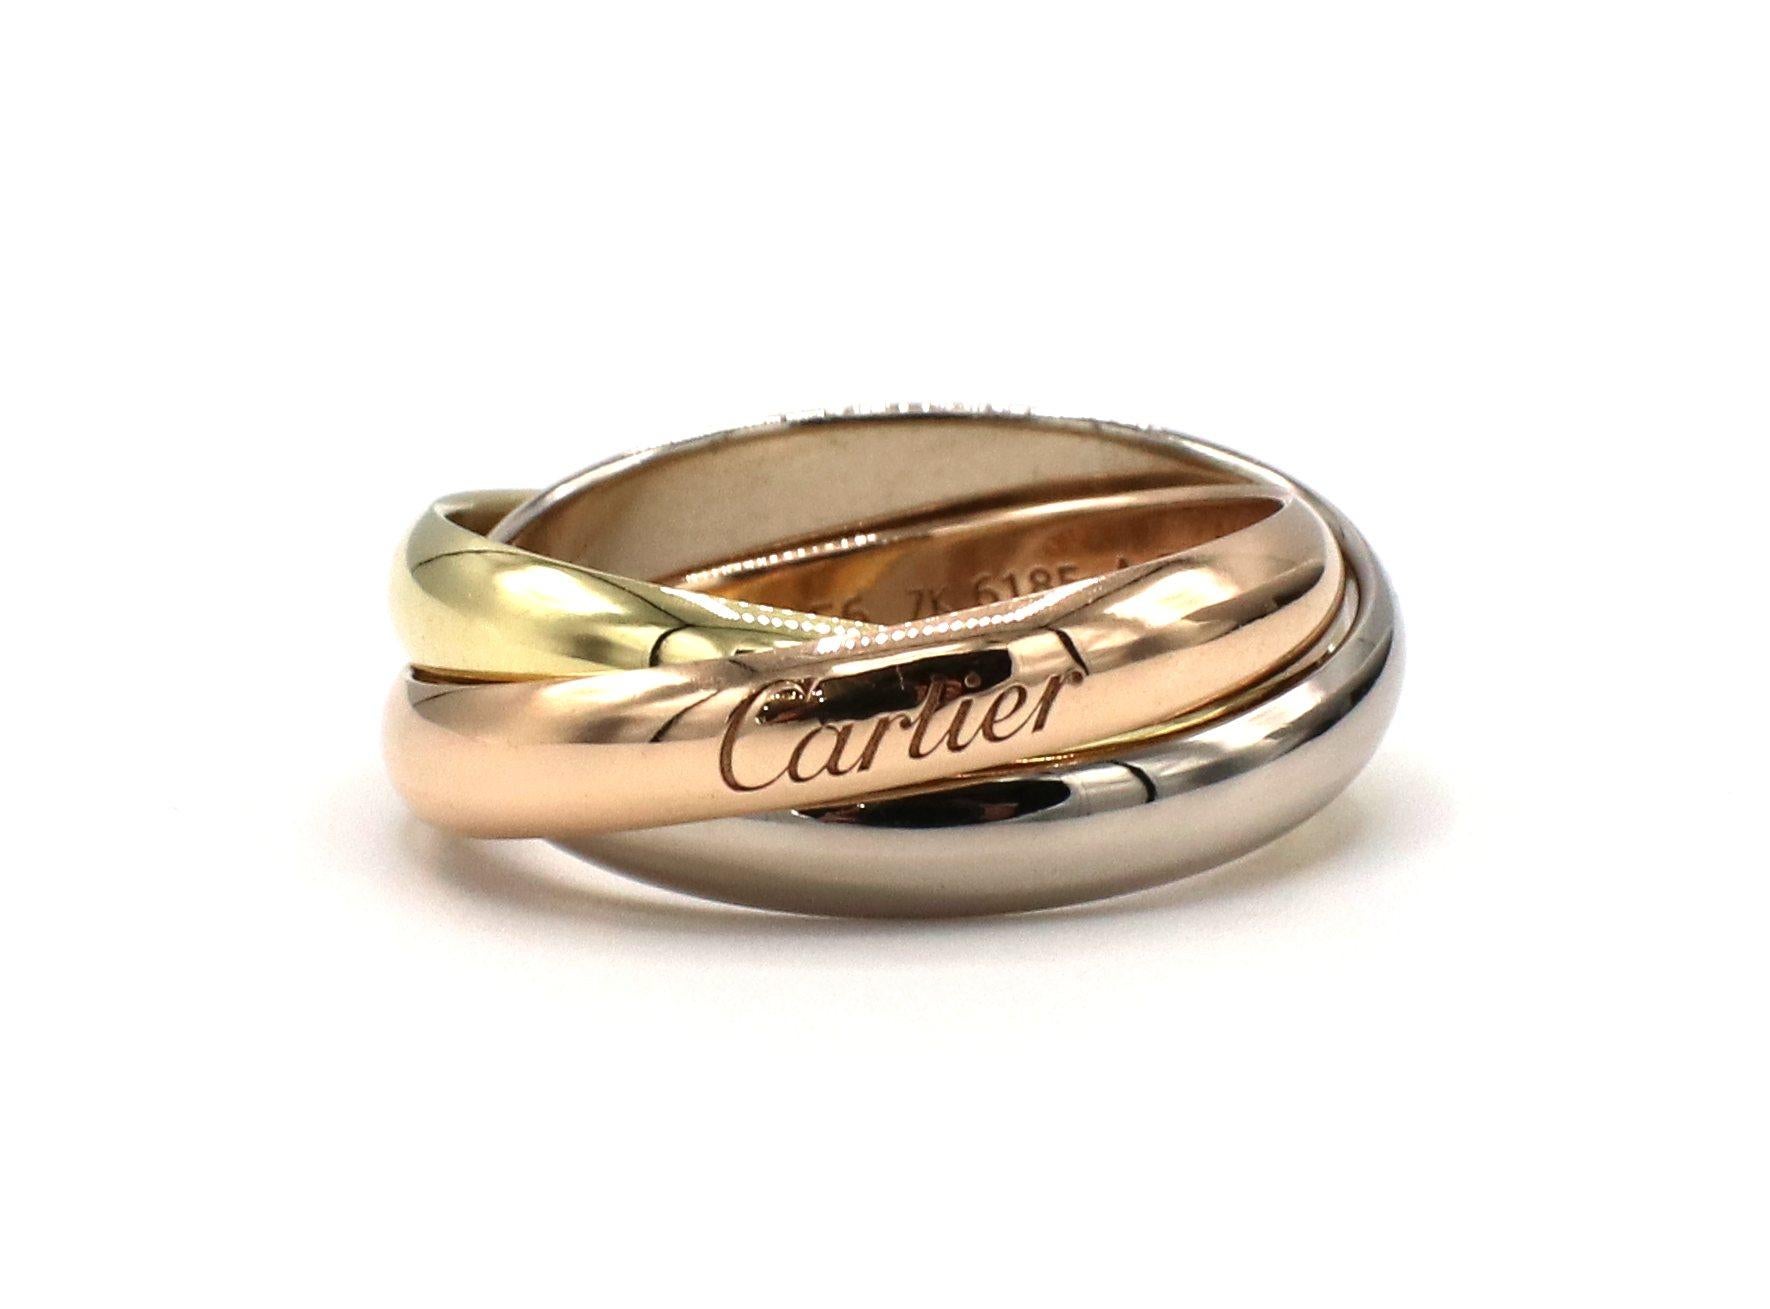 Cartier Trinity Rolling Ring Rose Yellow White Gold Medium Model
Metal: 18k white, rose, yellow gold
Weight: 9.14 grams
Width: Each band is 3.5mm
Size: 56 (7.5 US)
Notes: Box & papers included 
Retail: $1,420 USD